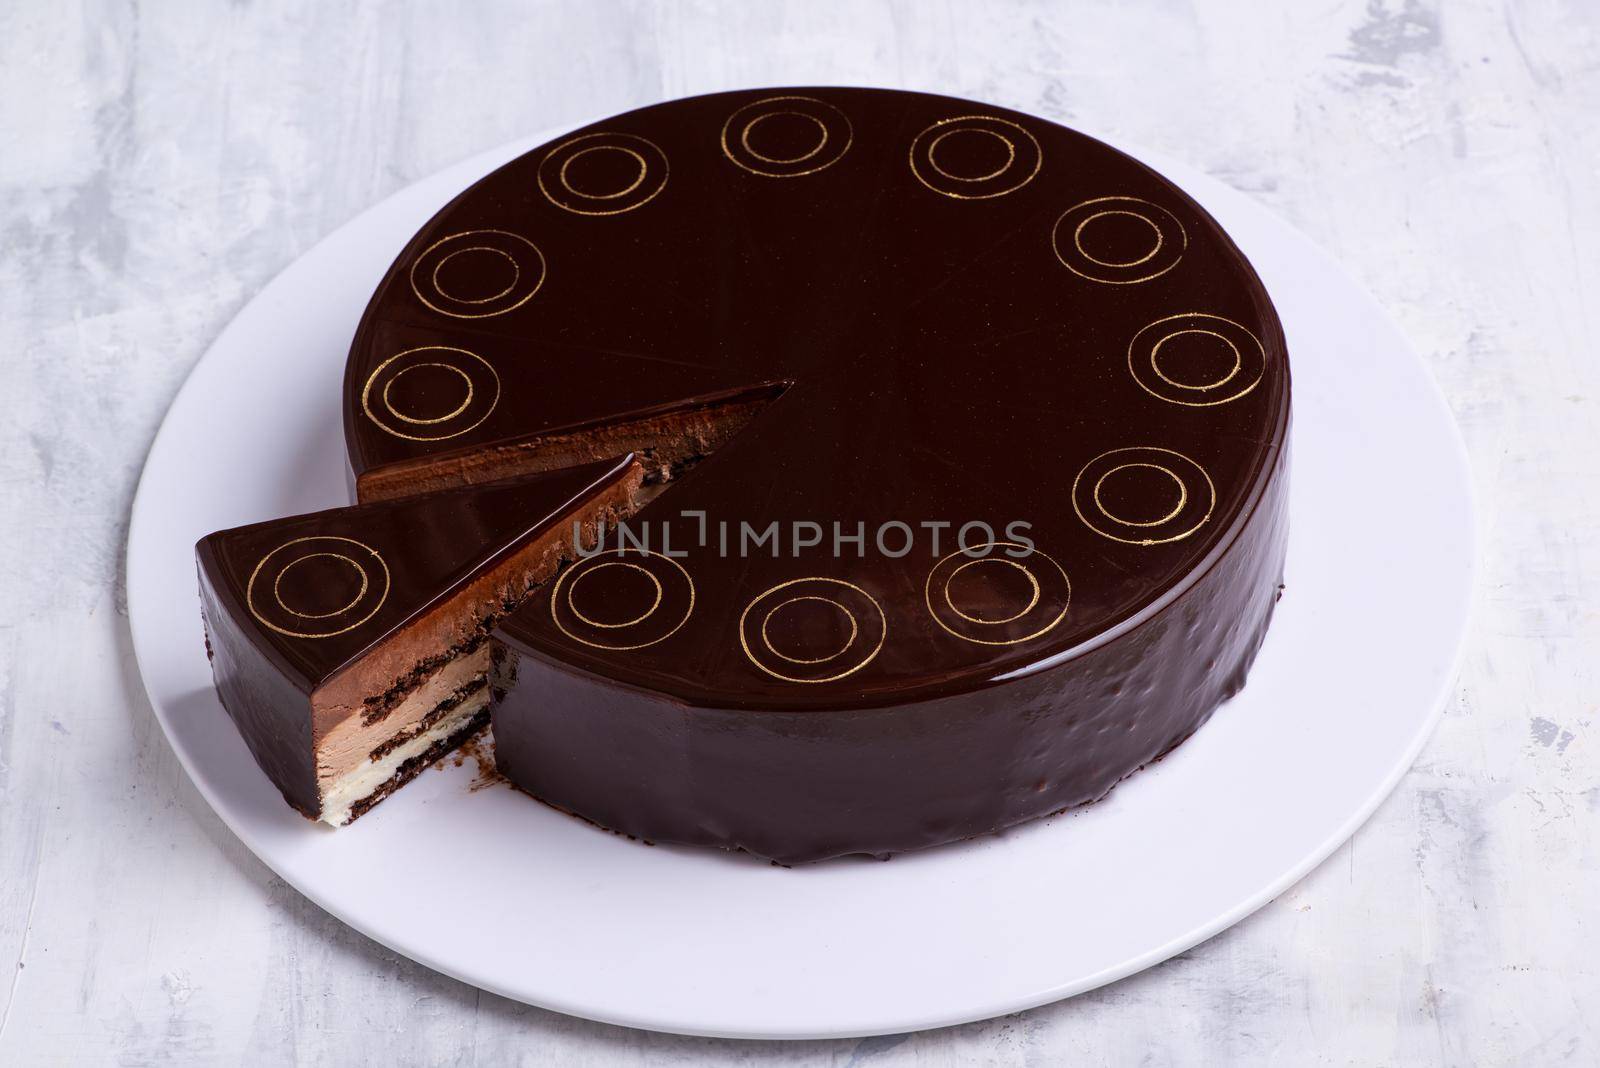 A top view shot of a chocolate cake on a white plate